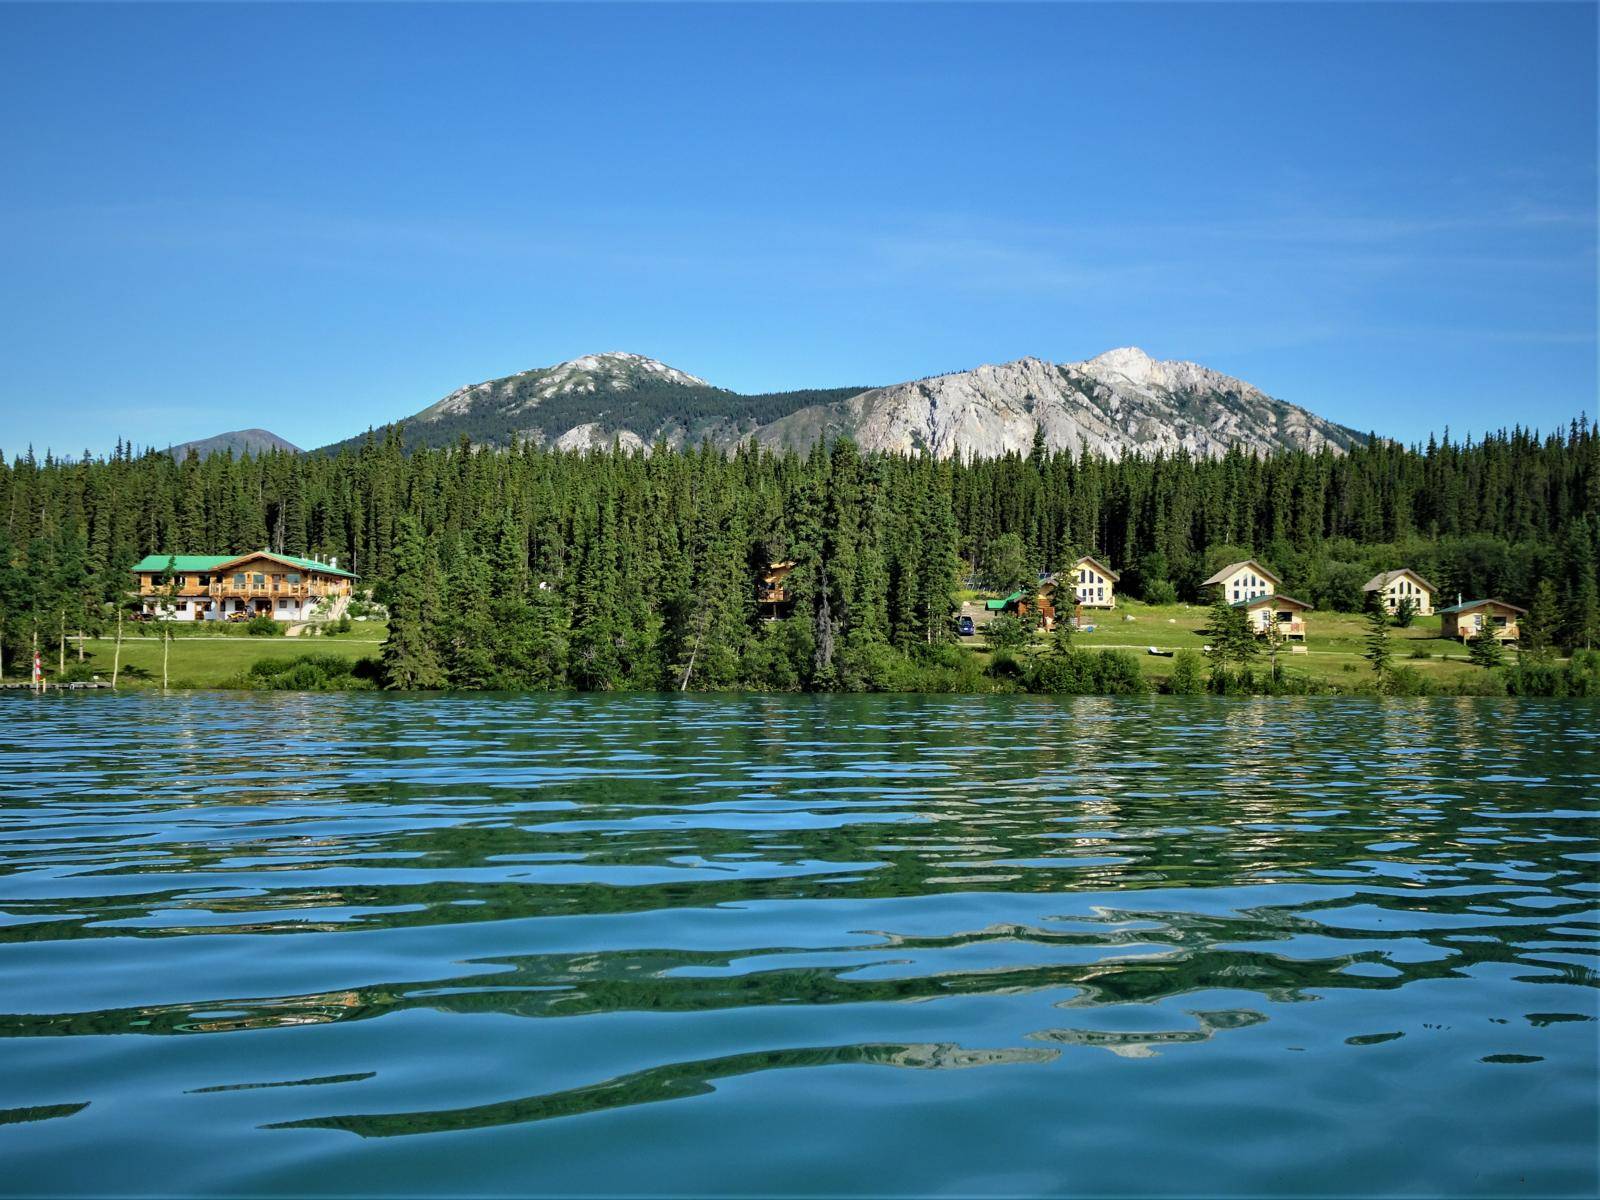 view over water from lake to resort and mountains